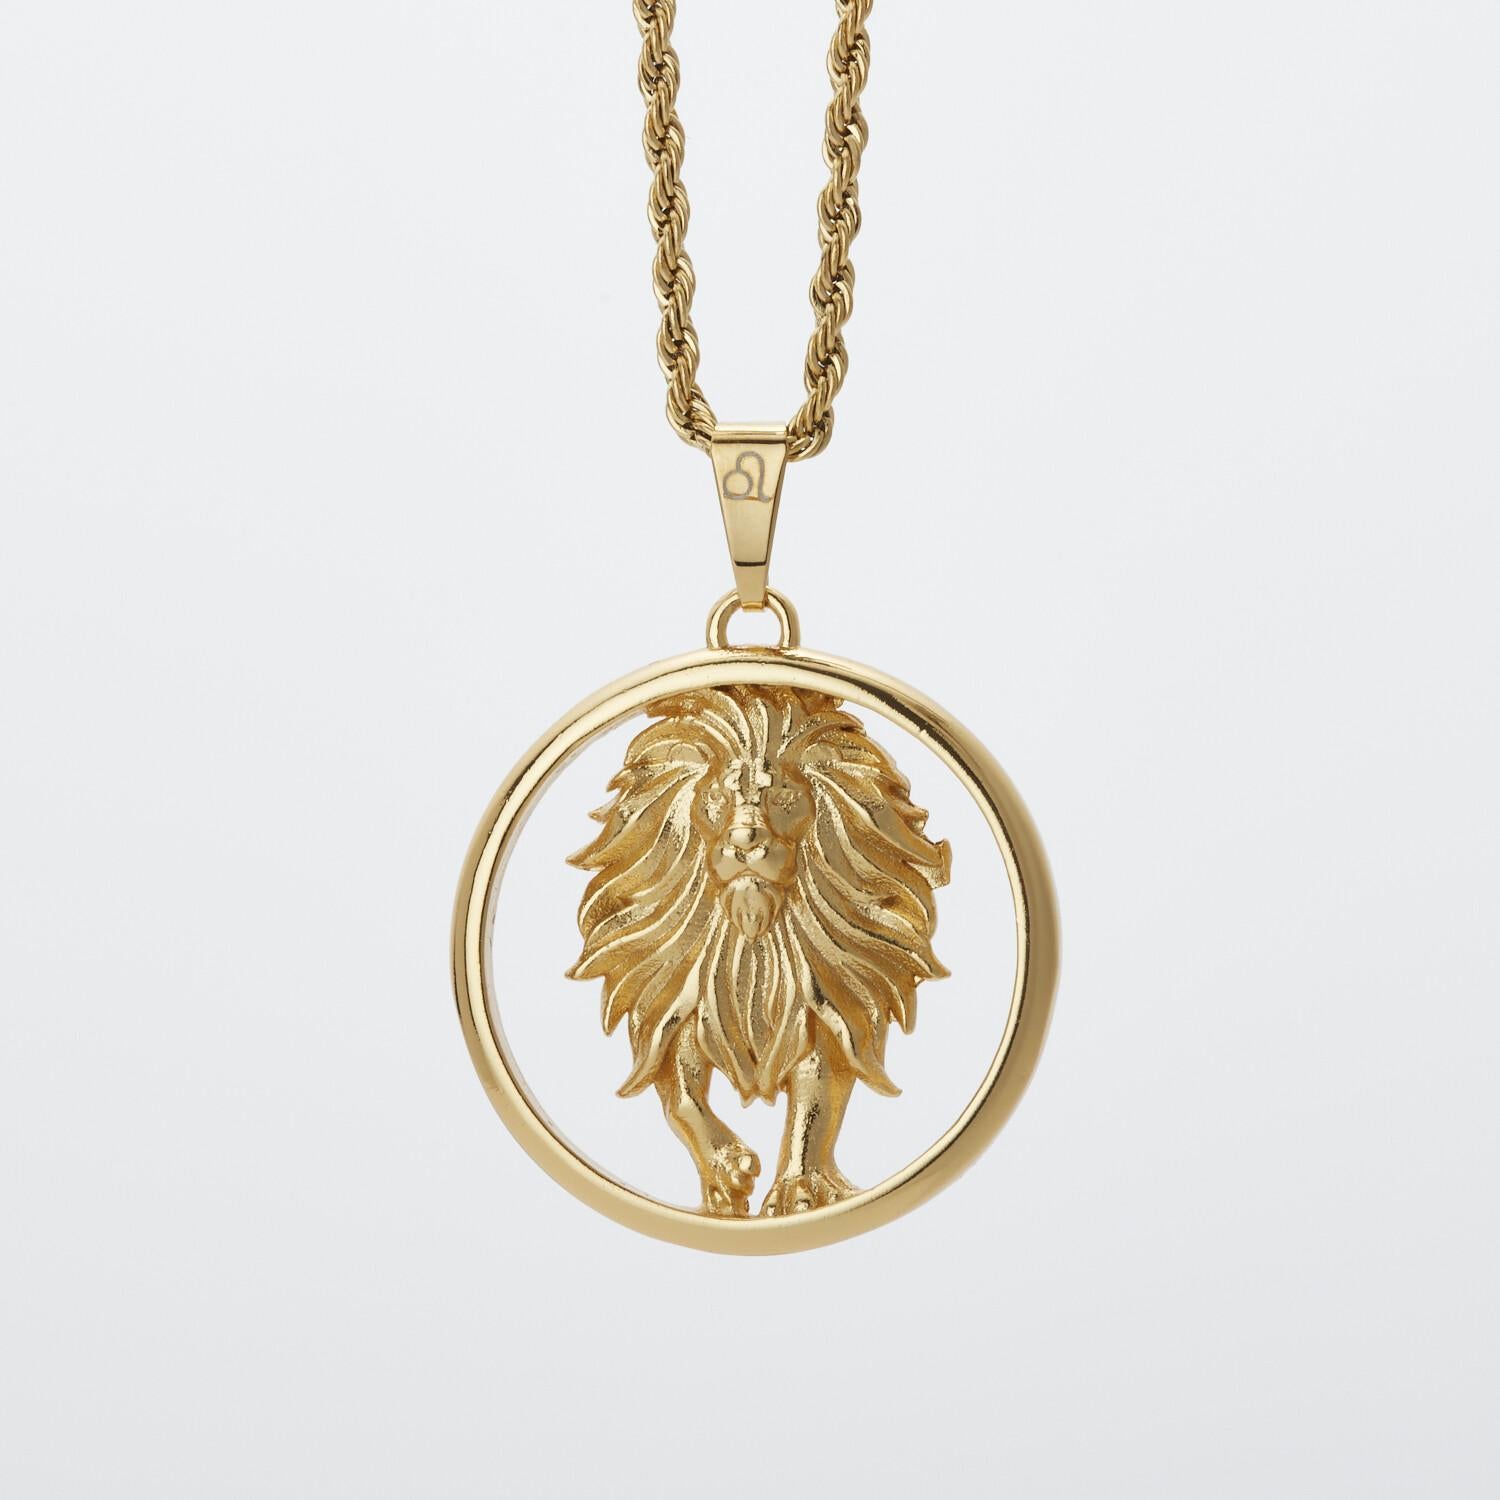 Eternally Leo (July 23 – August 22) 

The Eternal Zodiac “Leo” Pendant features the symbol of the lion. Leo is a fire sign—ruled by the Sun—and those born under this sign often have a bold nature and an outgoing personality. Leos are determined